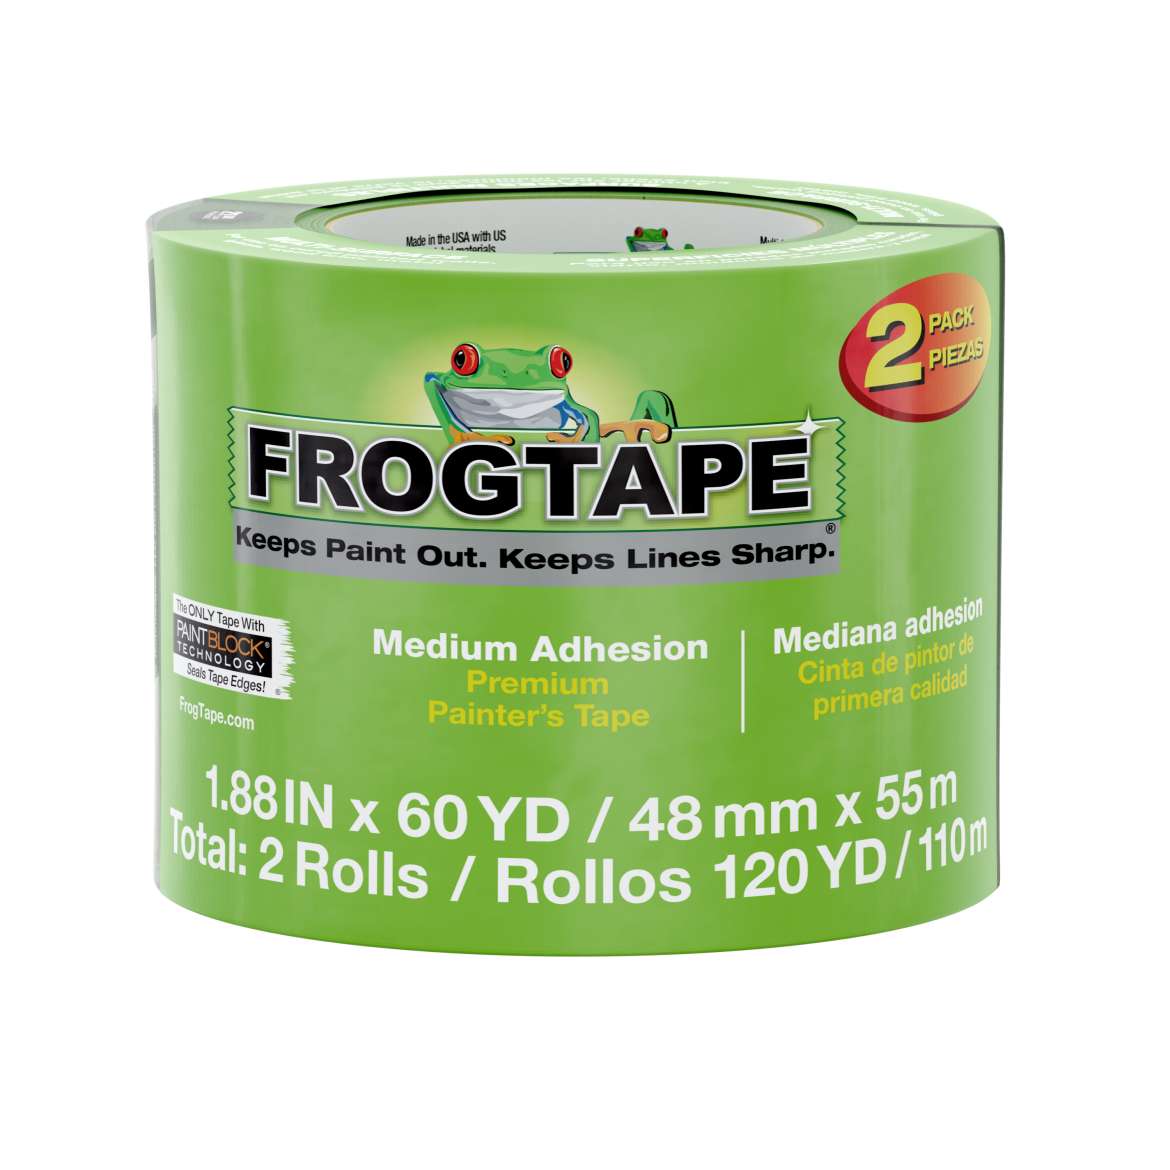 FrogTape® Multi-Surface Painting Tape - Green, 2 pk, 1.88 in. x 60 yd.